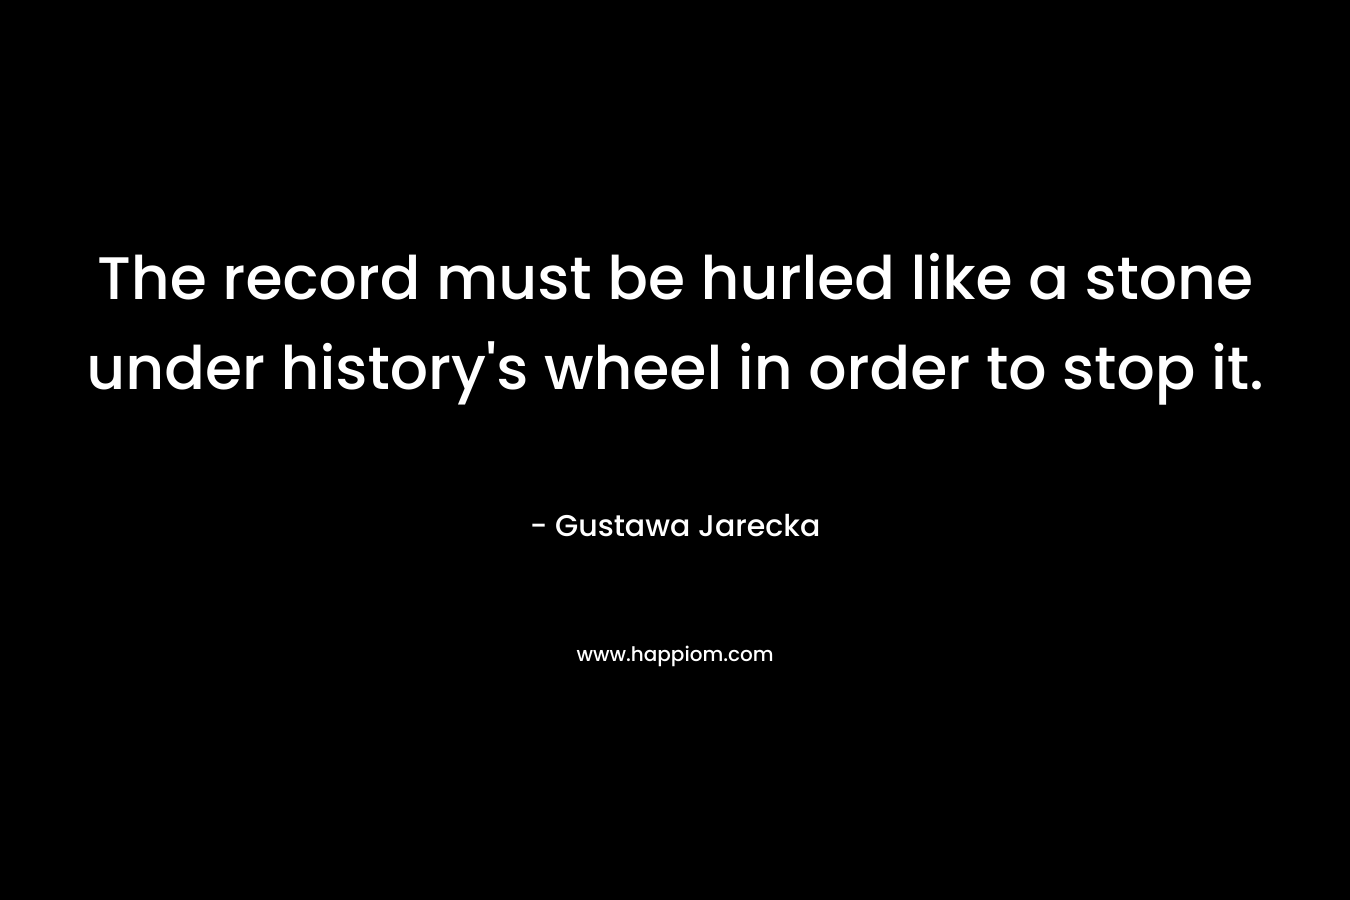 The record must be hurled like a stone under history’s wheel in order to stop it. – Gustawa Jarecka